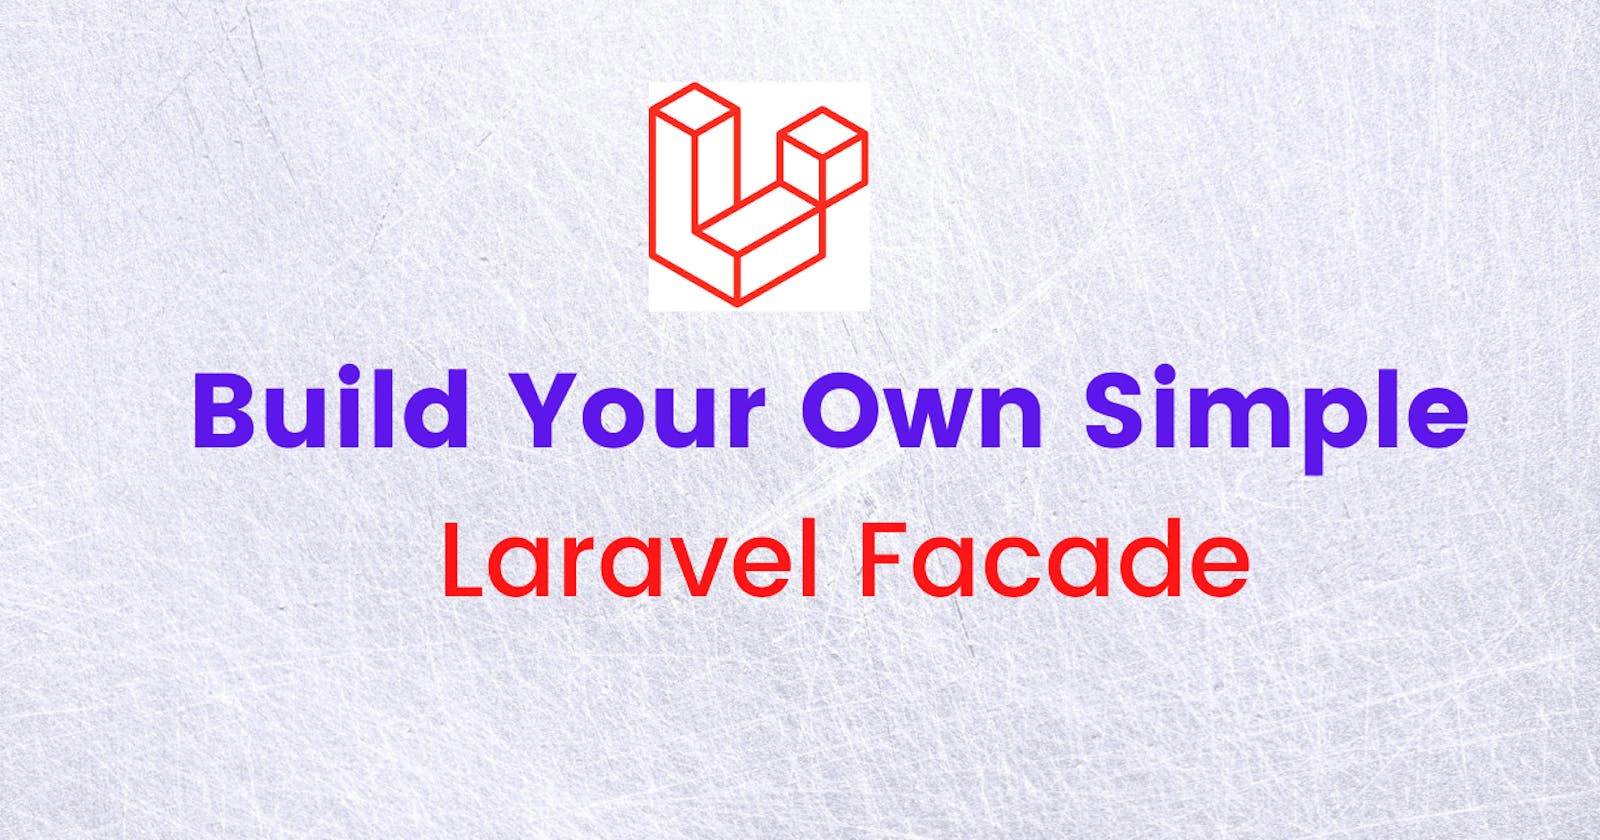 Learn How Laravel Facade Works By Building Your Own Facade